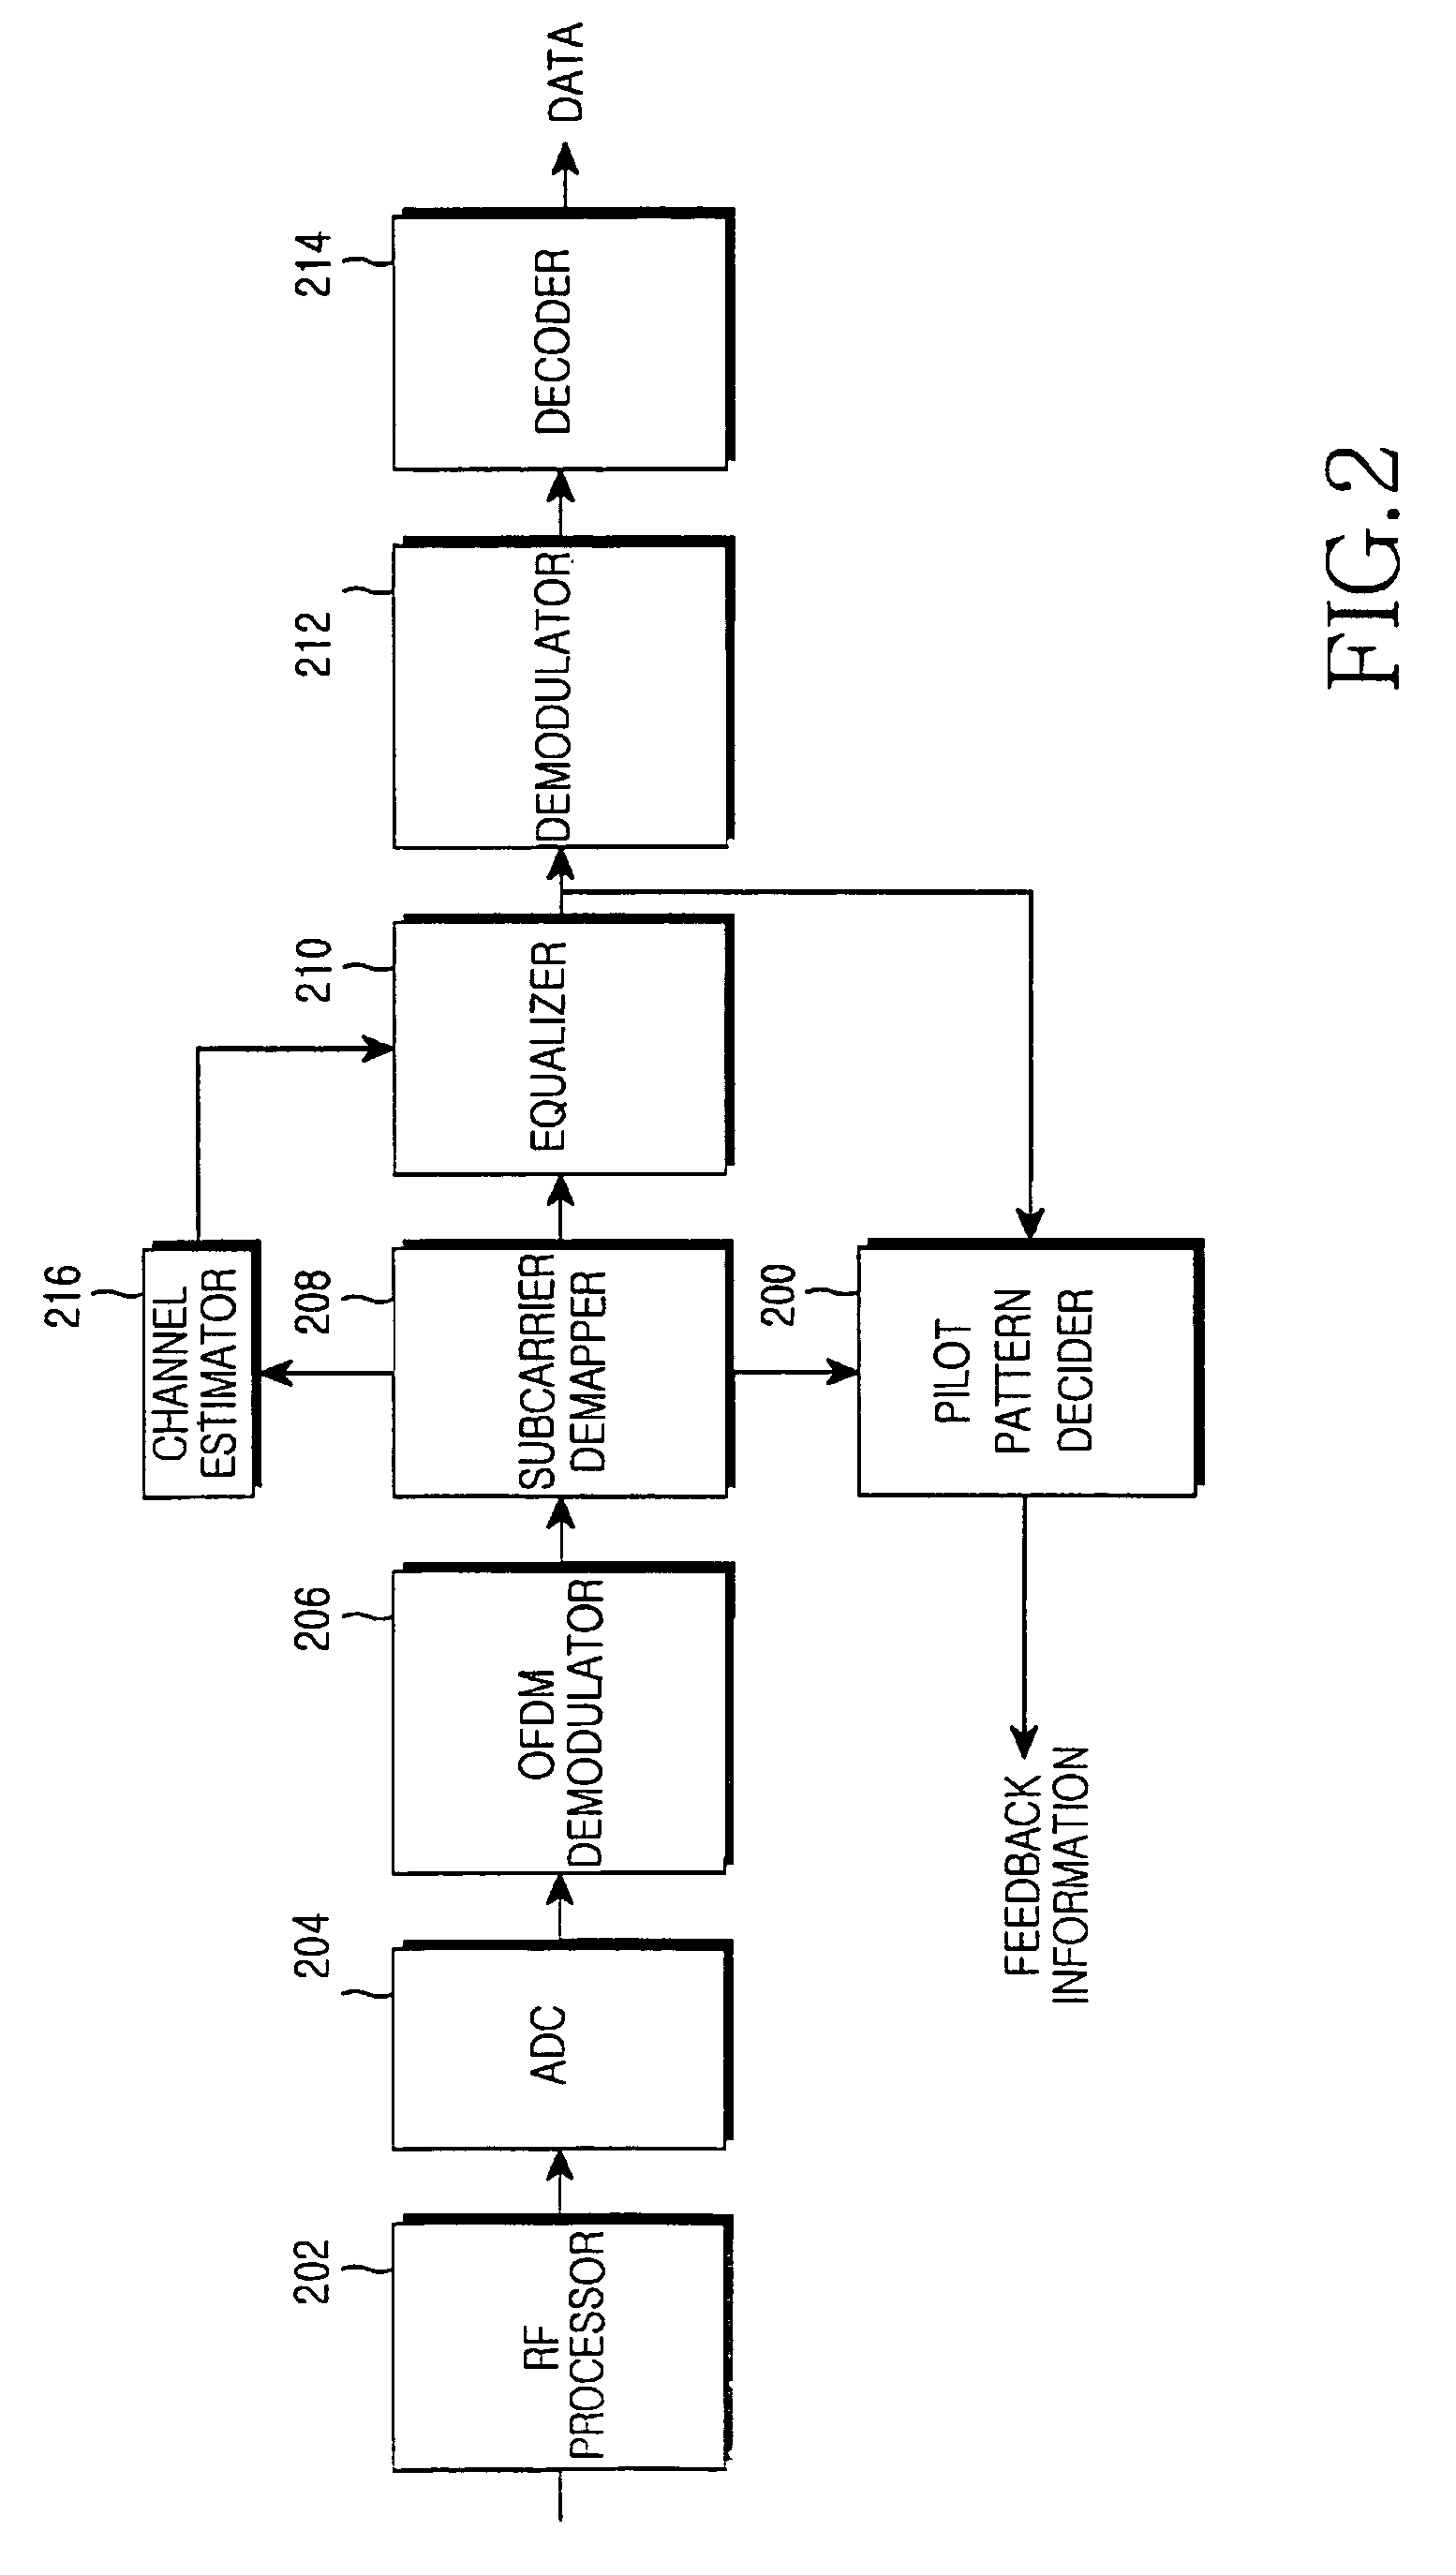 Apparatus and method for determining pilot pattern in a broadband wireless access communication system